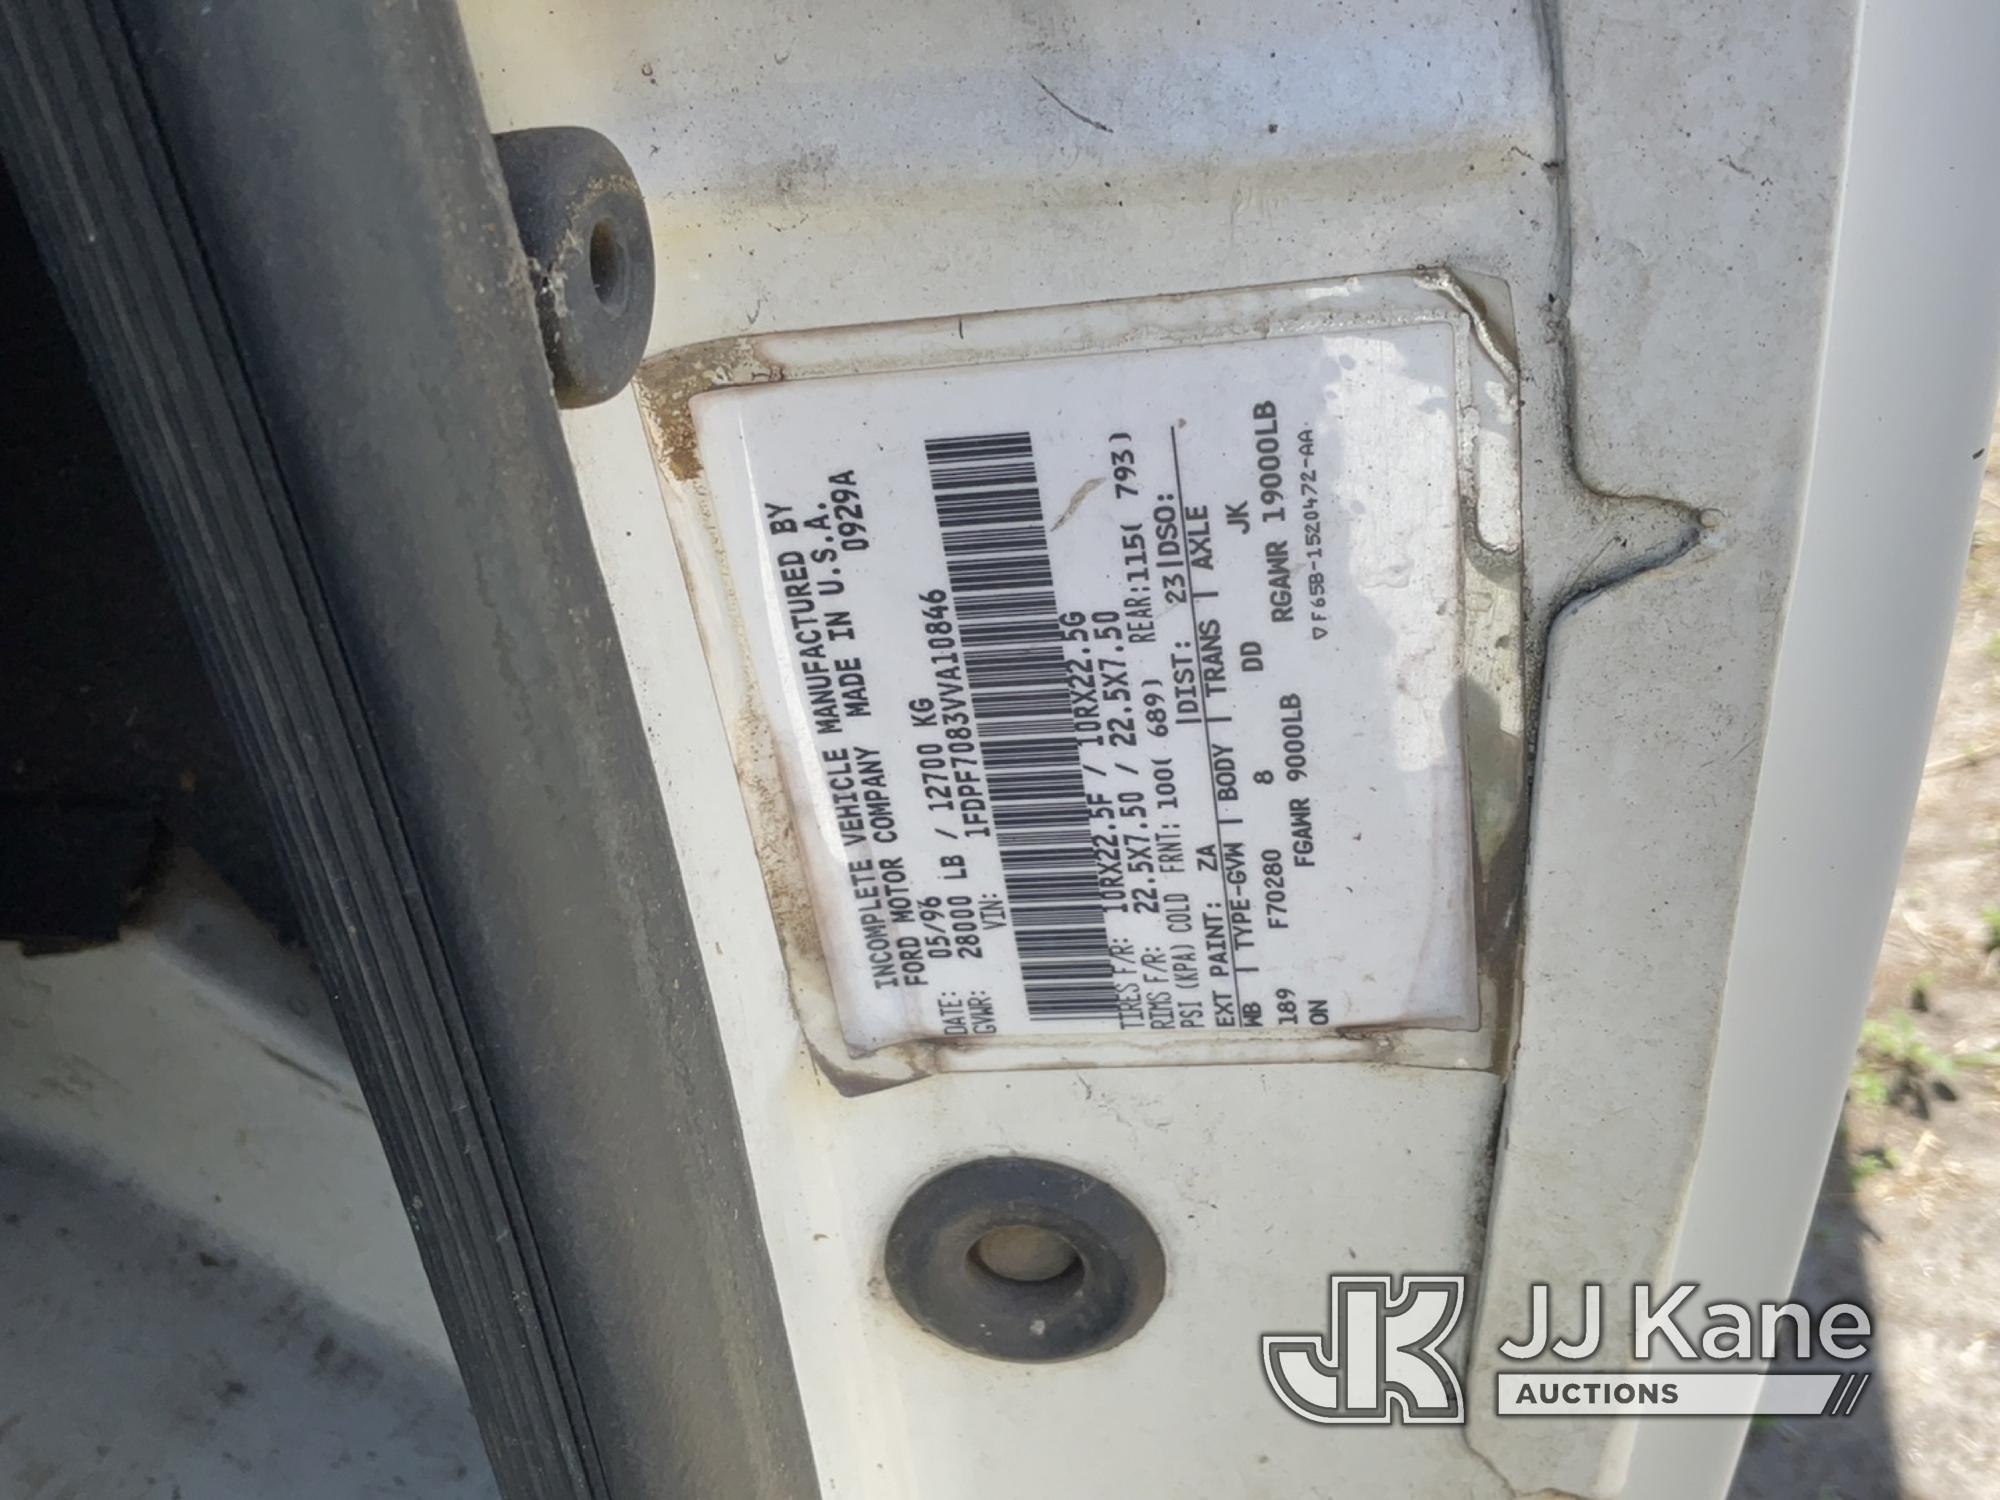 (Tampa, FL) 1997 Ford F700 Tank Truck, Tank has been Purged Clean Not Running, Turns Over, Will Not